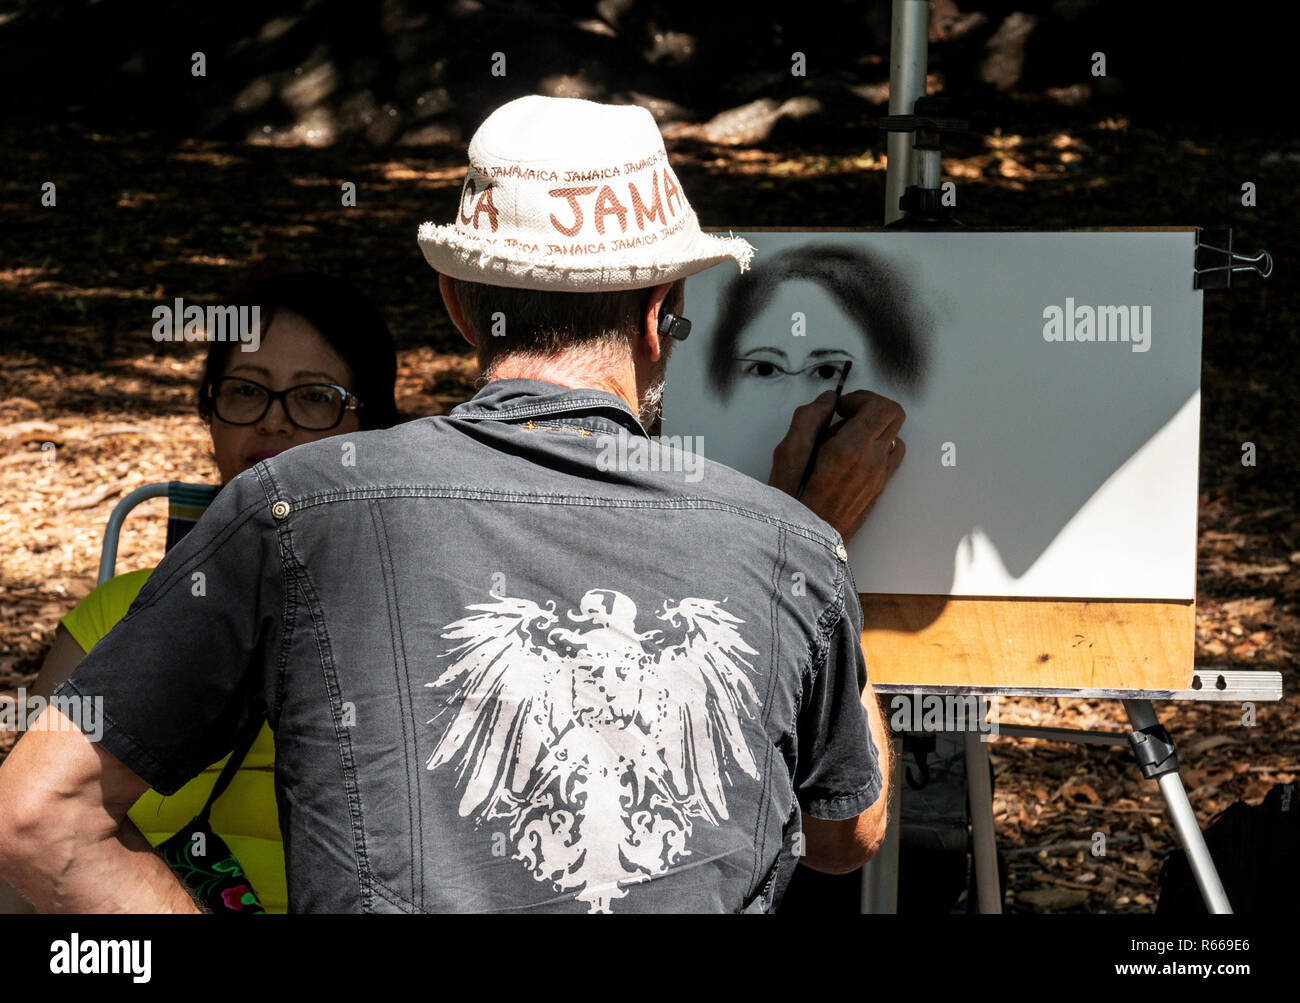 New York City, USA - 15 August 2018: An artist wearing a Jamaica hat is sketching a picture of a women in Central Park NYC. Stock Photo